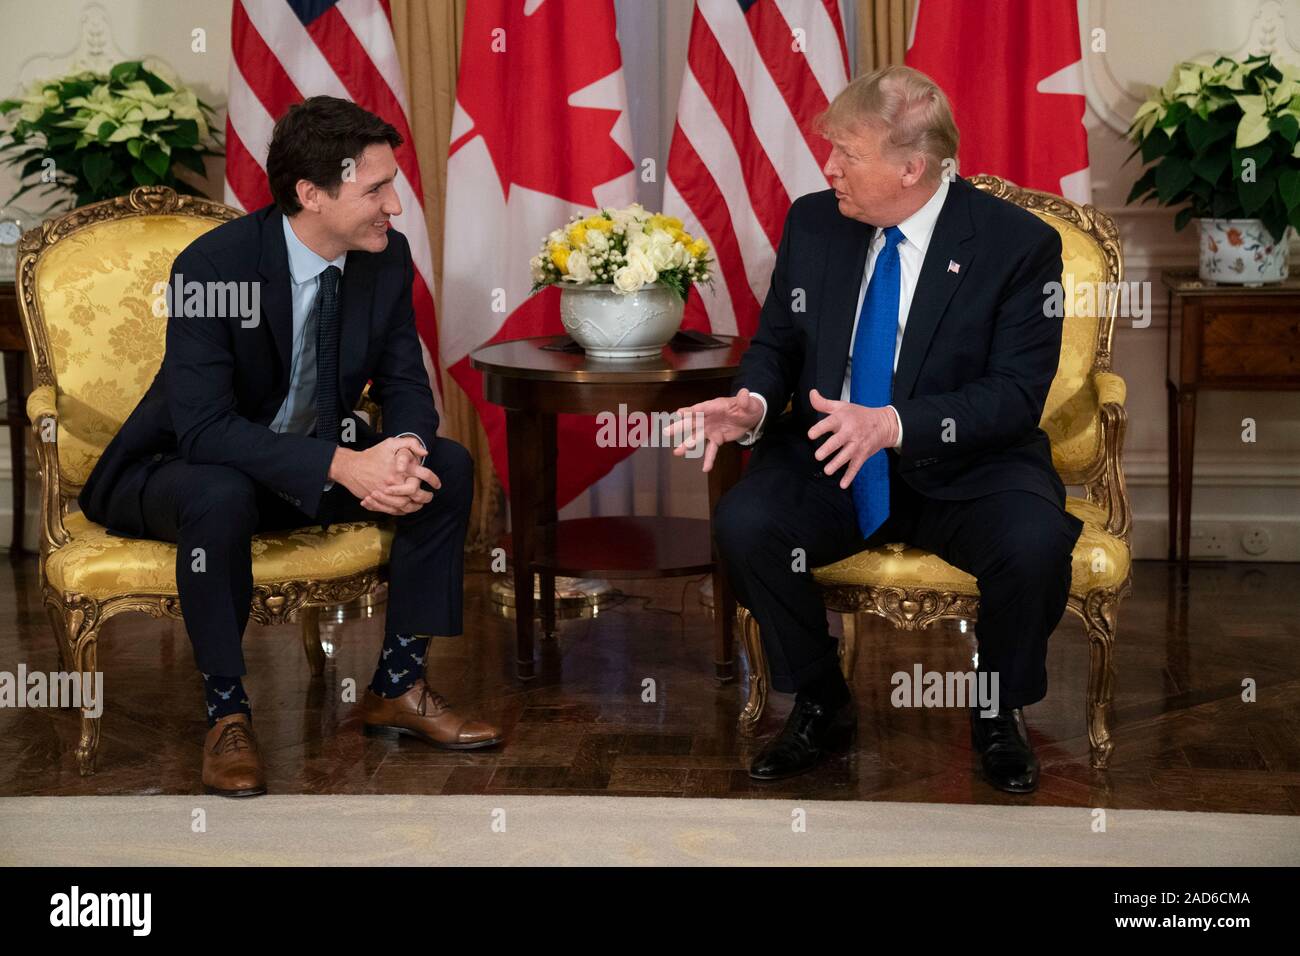 London, UK. 03 December, 2019. U.S. President Donald Trump and Canadian Prime Minister Justin Trudeau, left, hold a bilateral meeting prior to the start of the NATO Summit at Winfield House December 3, 2019 in London, UK.  Credit: Shealah Craighead/Planetpix/Alamy Live News Stock Photo